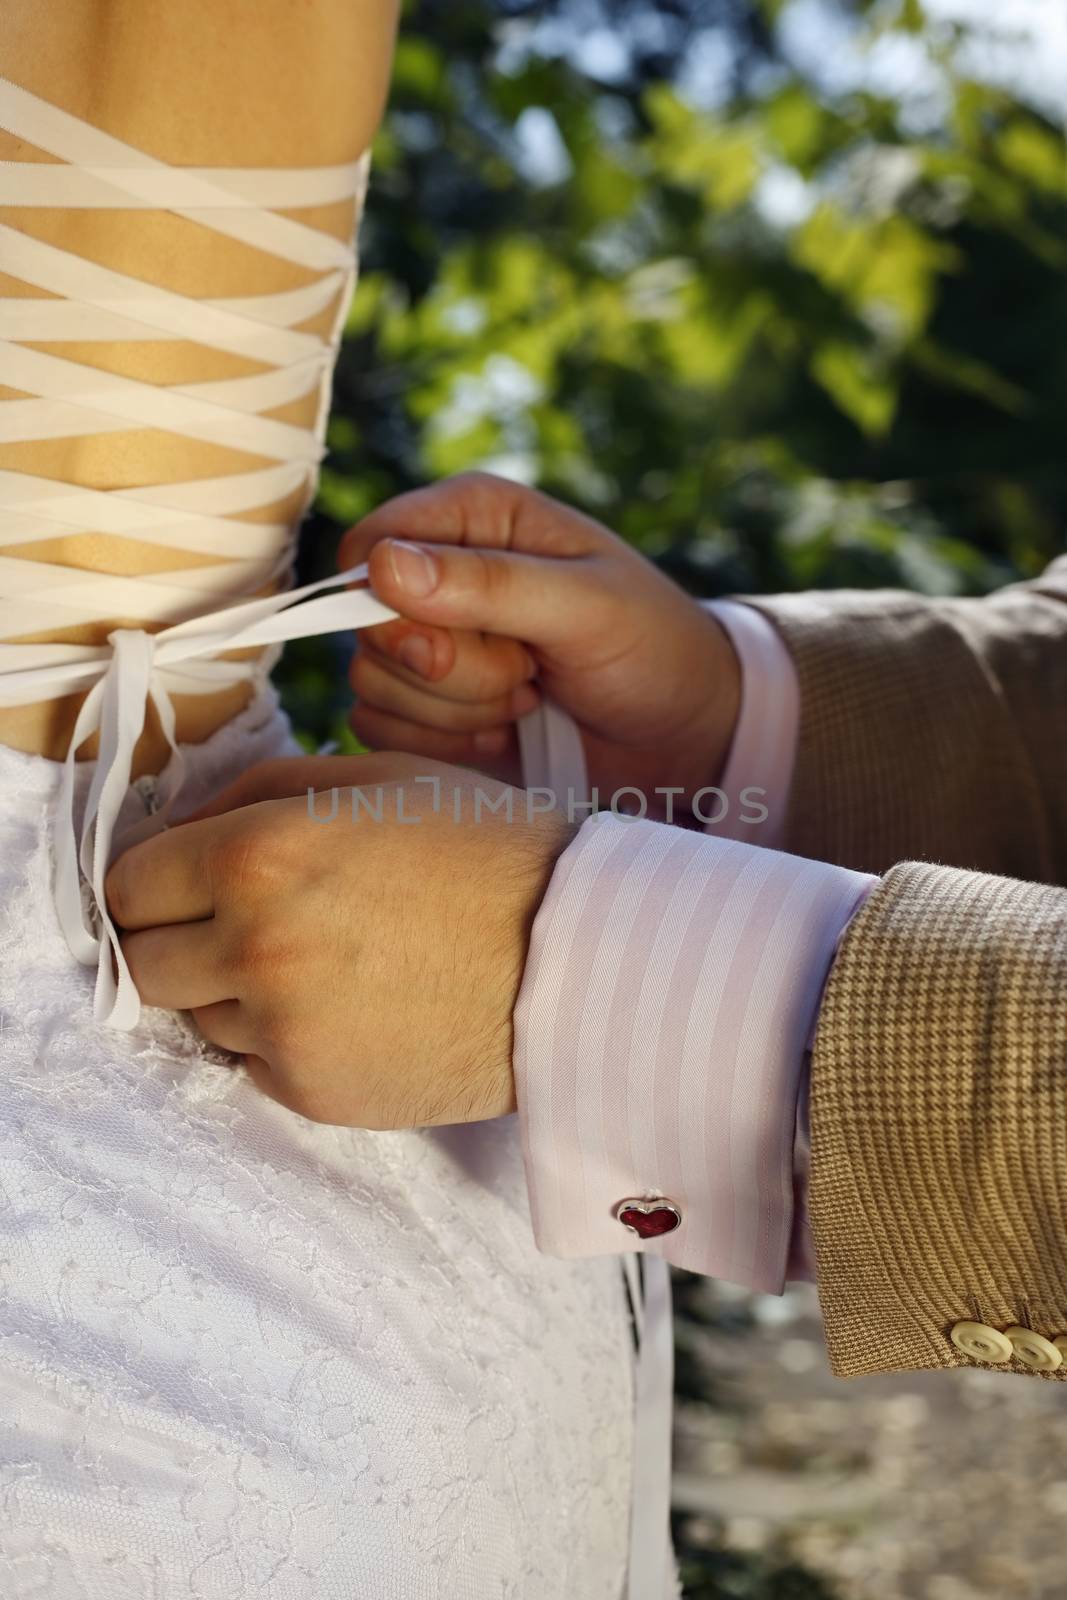 The groom helps the bride to tie a ribbon on the dress